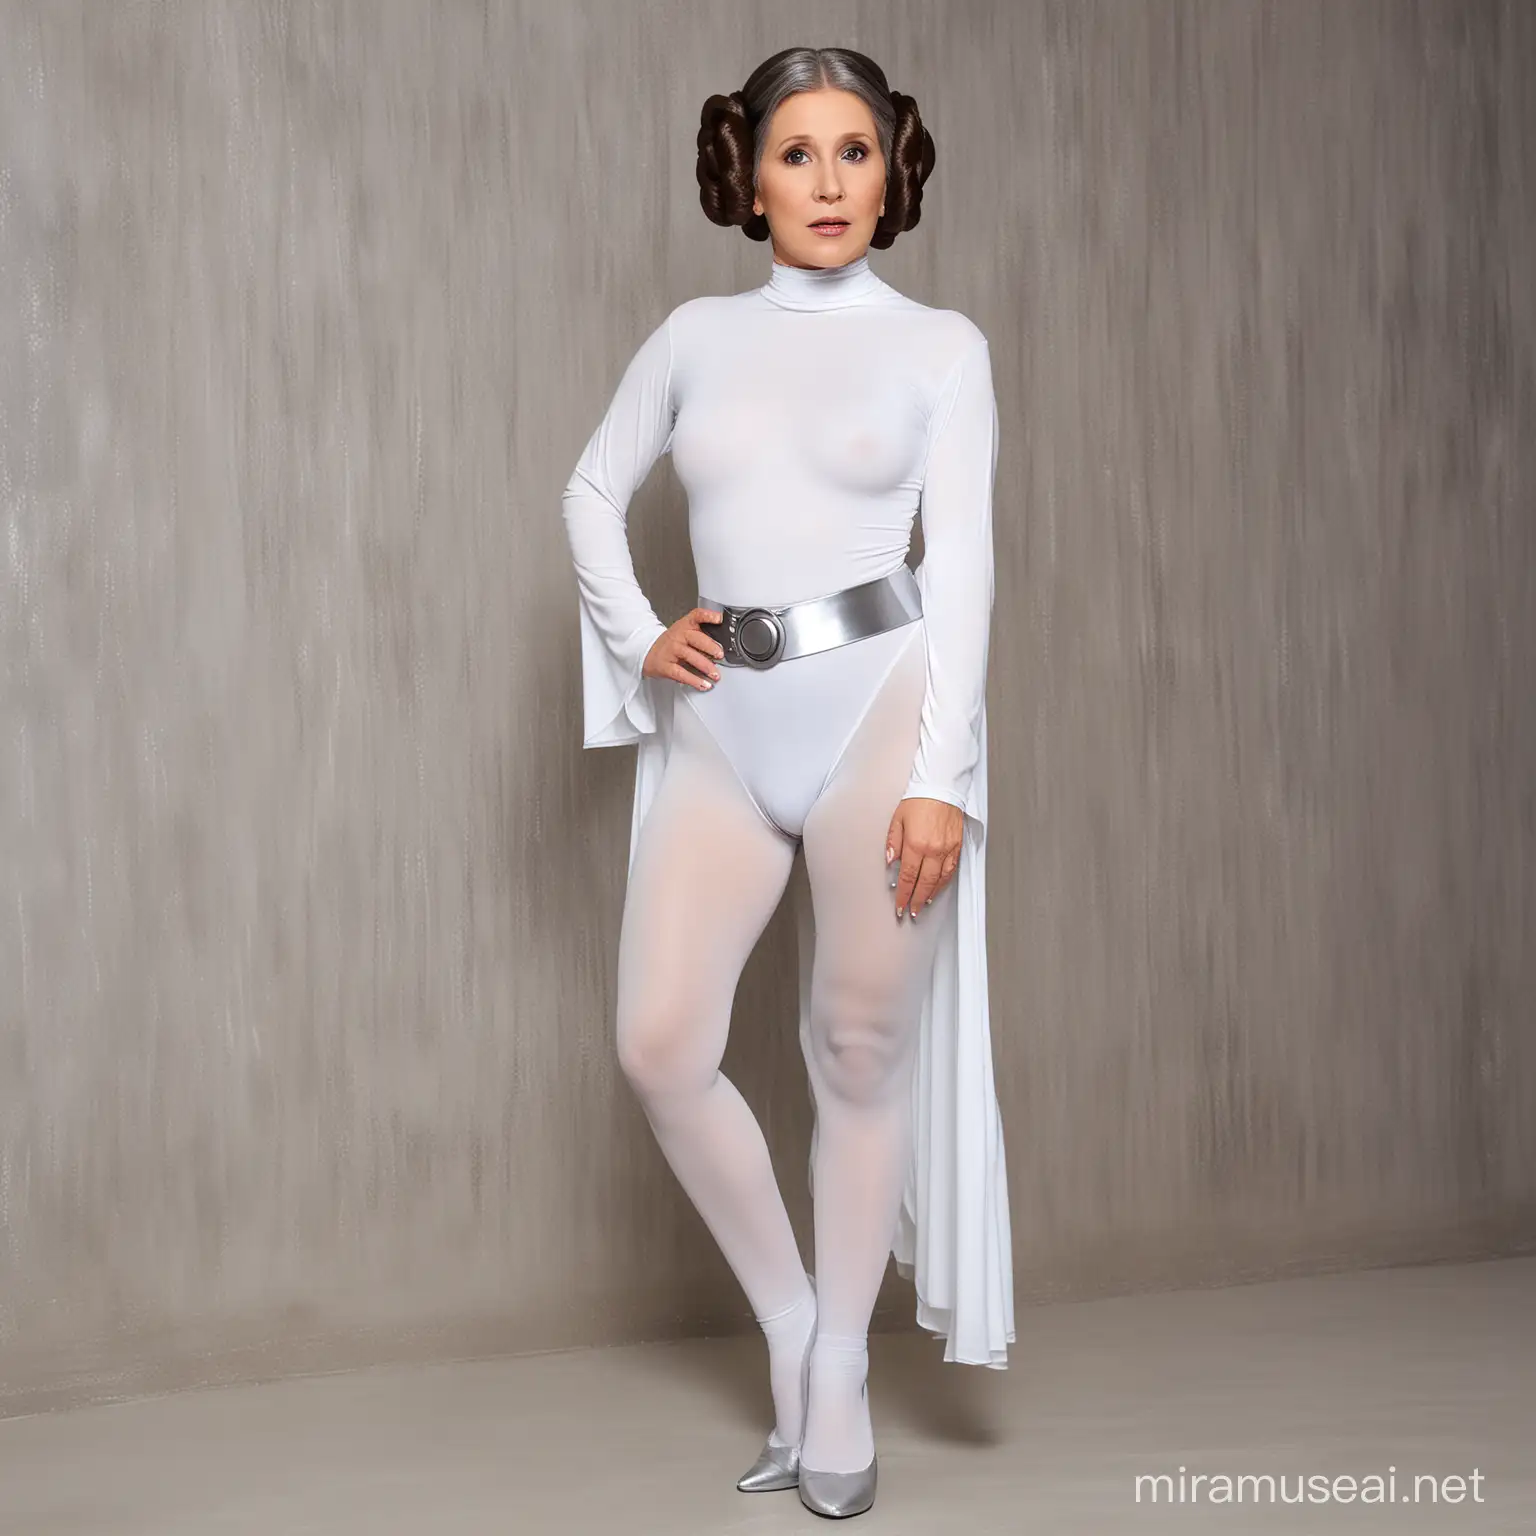 Elegant Mature Lady with Long Silver Hair in Princess Leia Inspired Attire and White Pantyhose